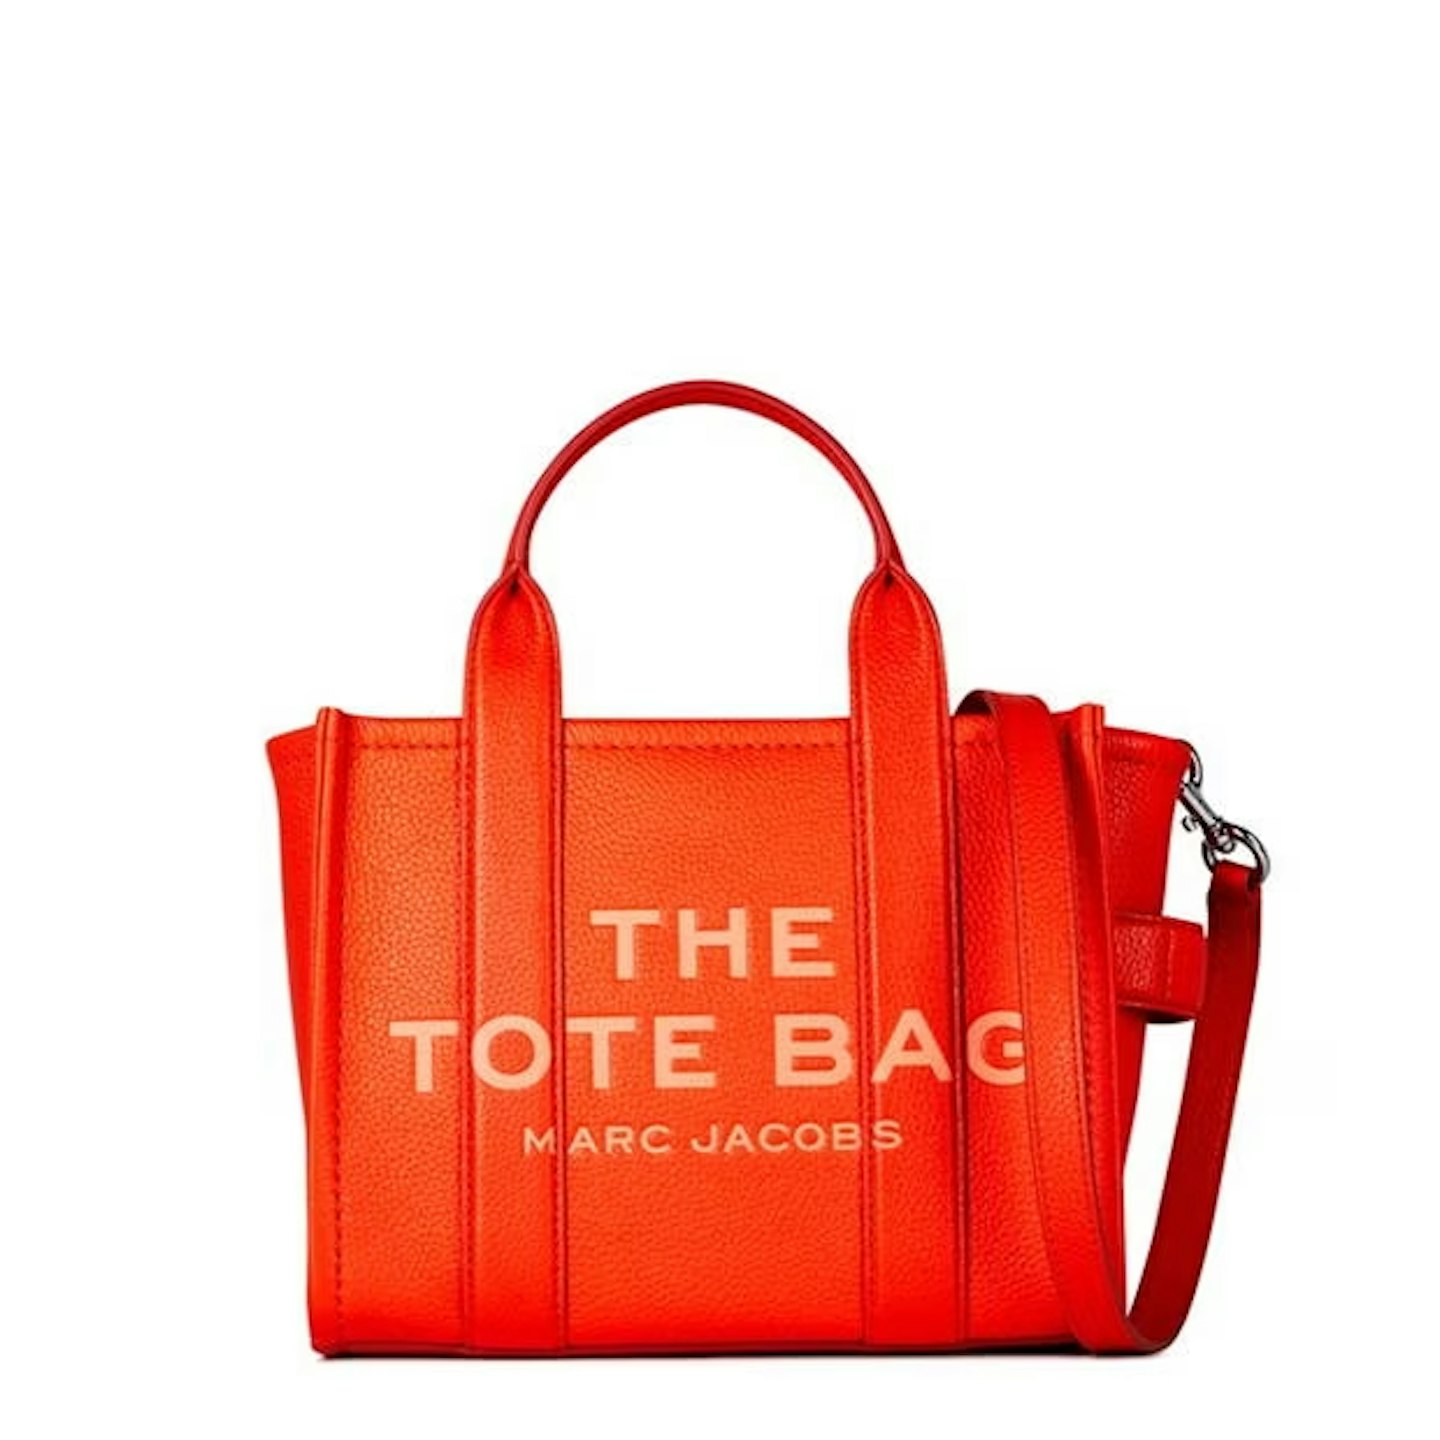 These Designer Tote Bags Are On Sale With Huge Discounts